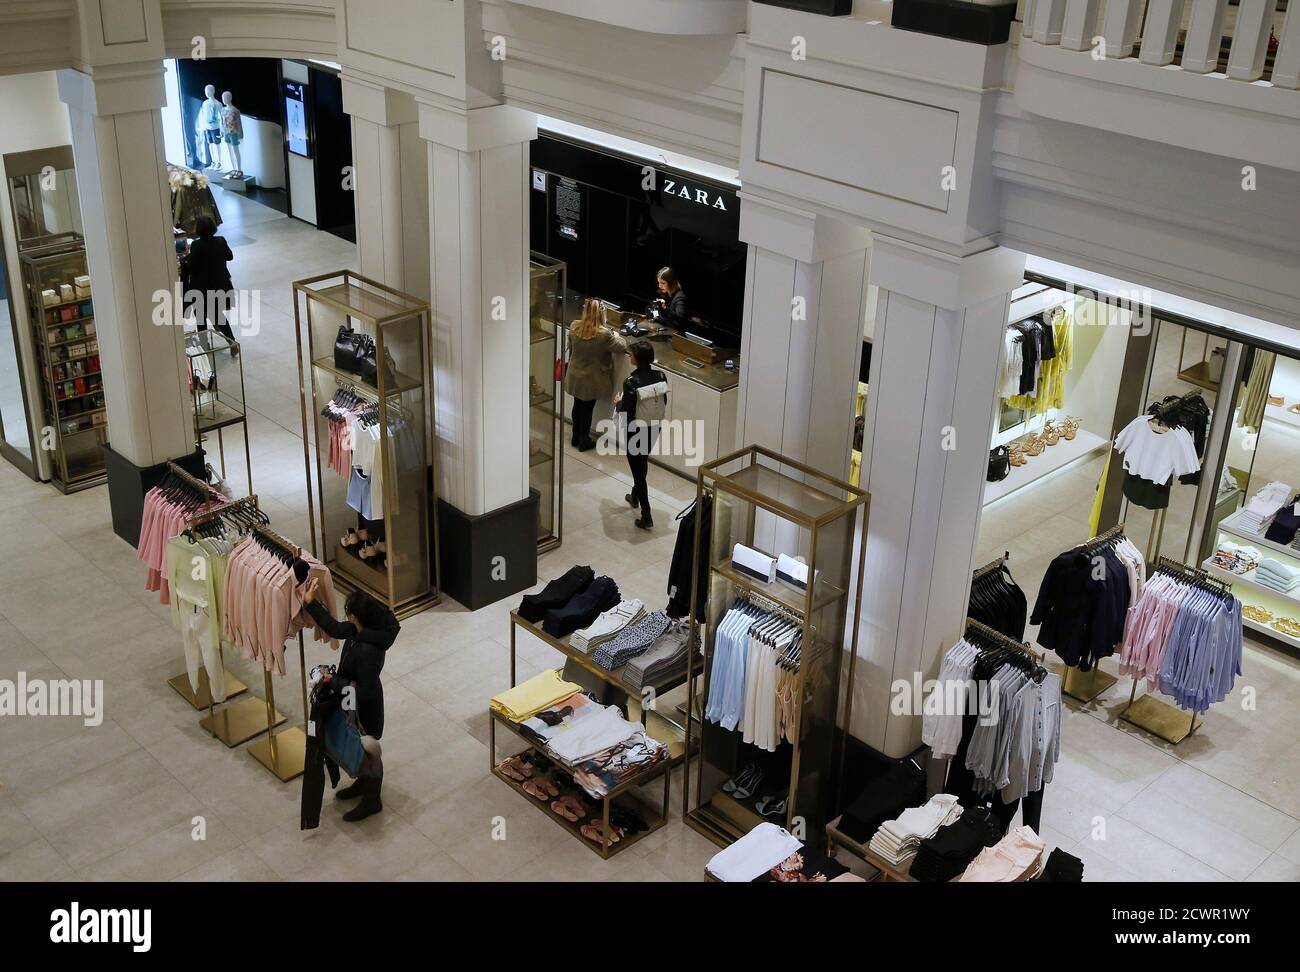 People walk inside a Zara store in central Madrid March 18, 2014. Inditex,  the world's biggest fashion retailer, will accelerate investment in 2014 to  open more new stores after results last year